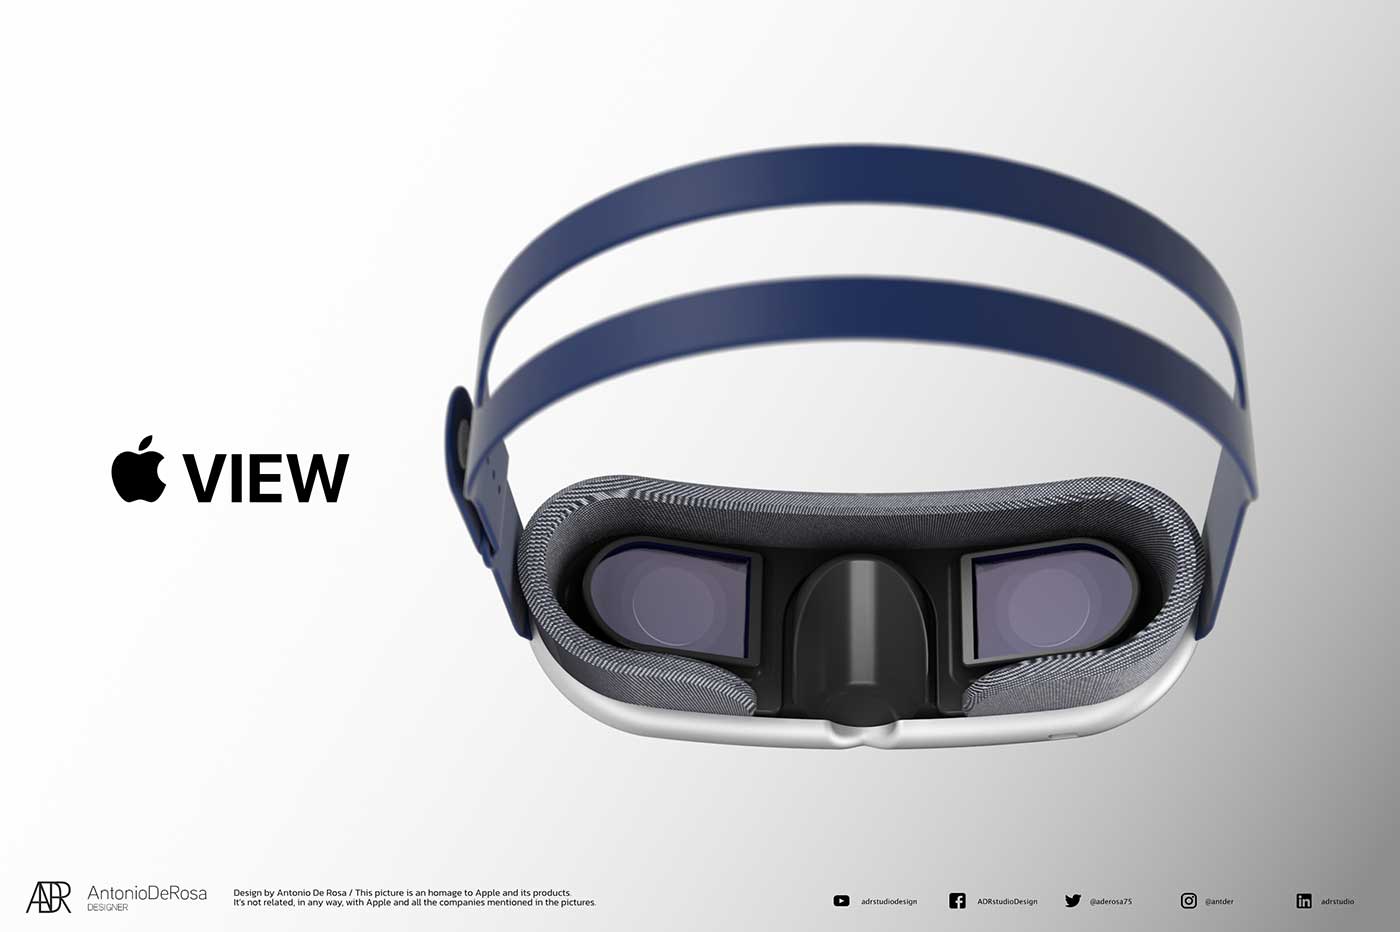 Apple mixed reality headset concept